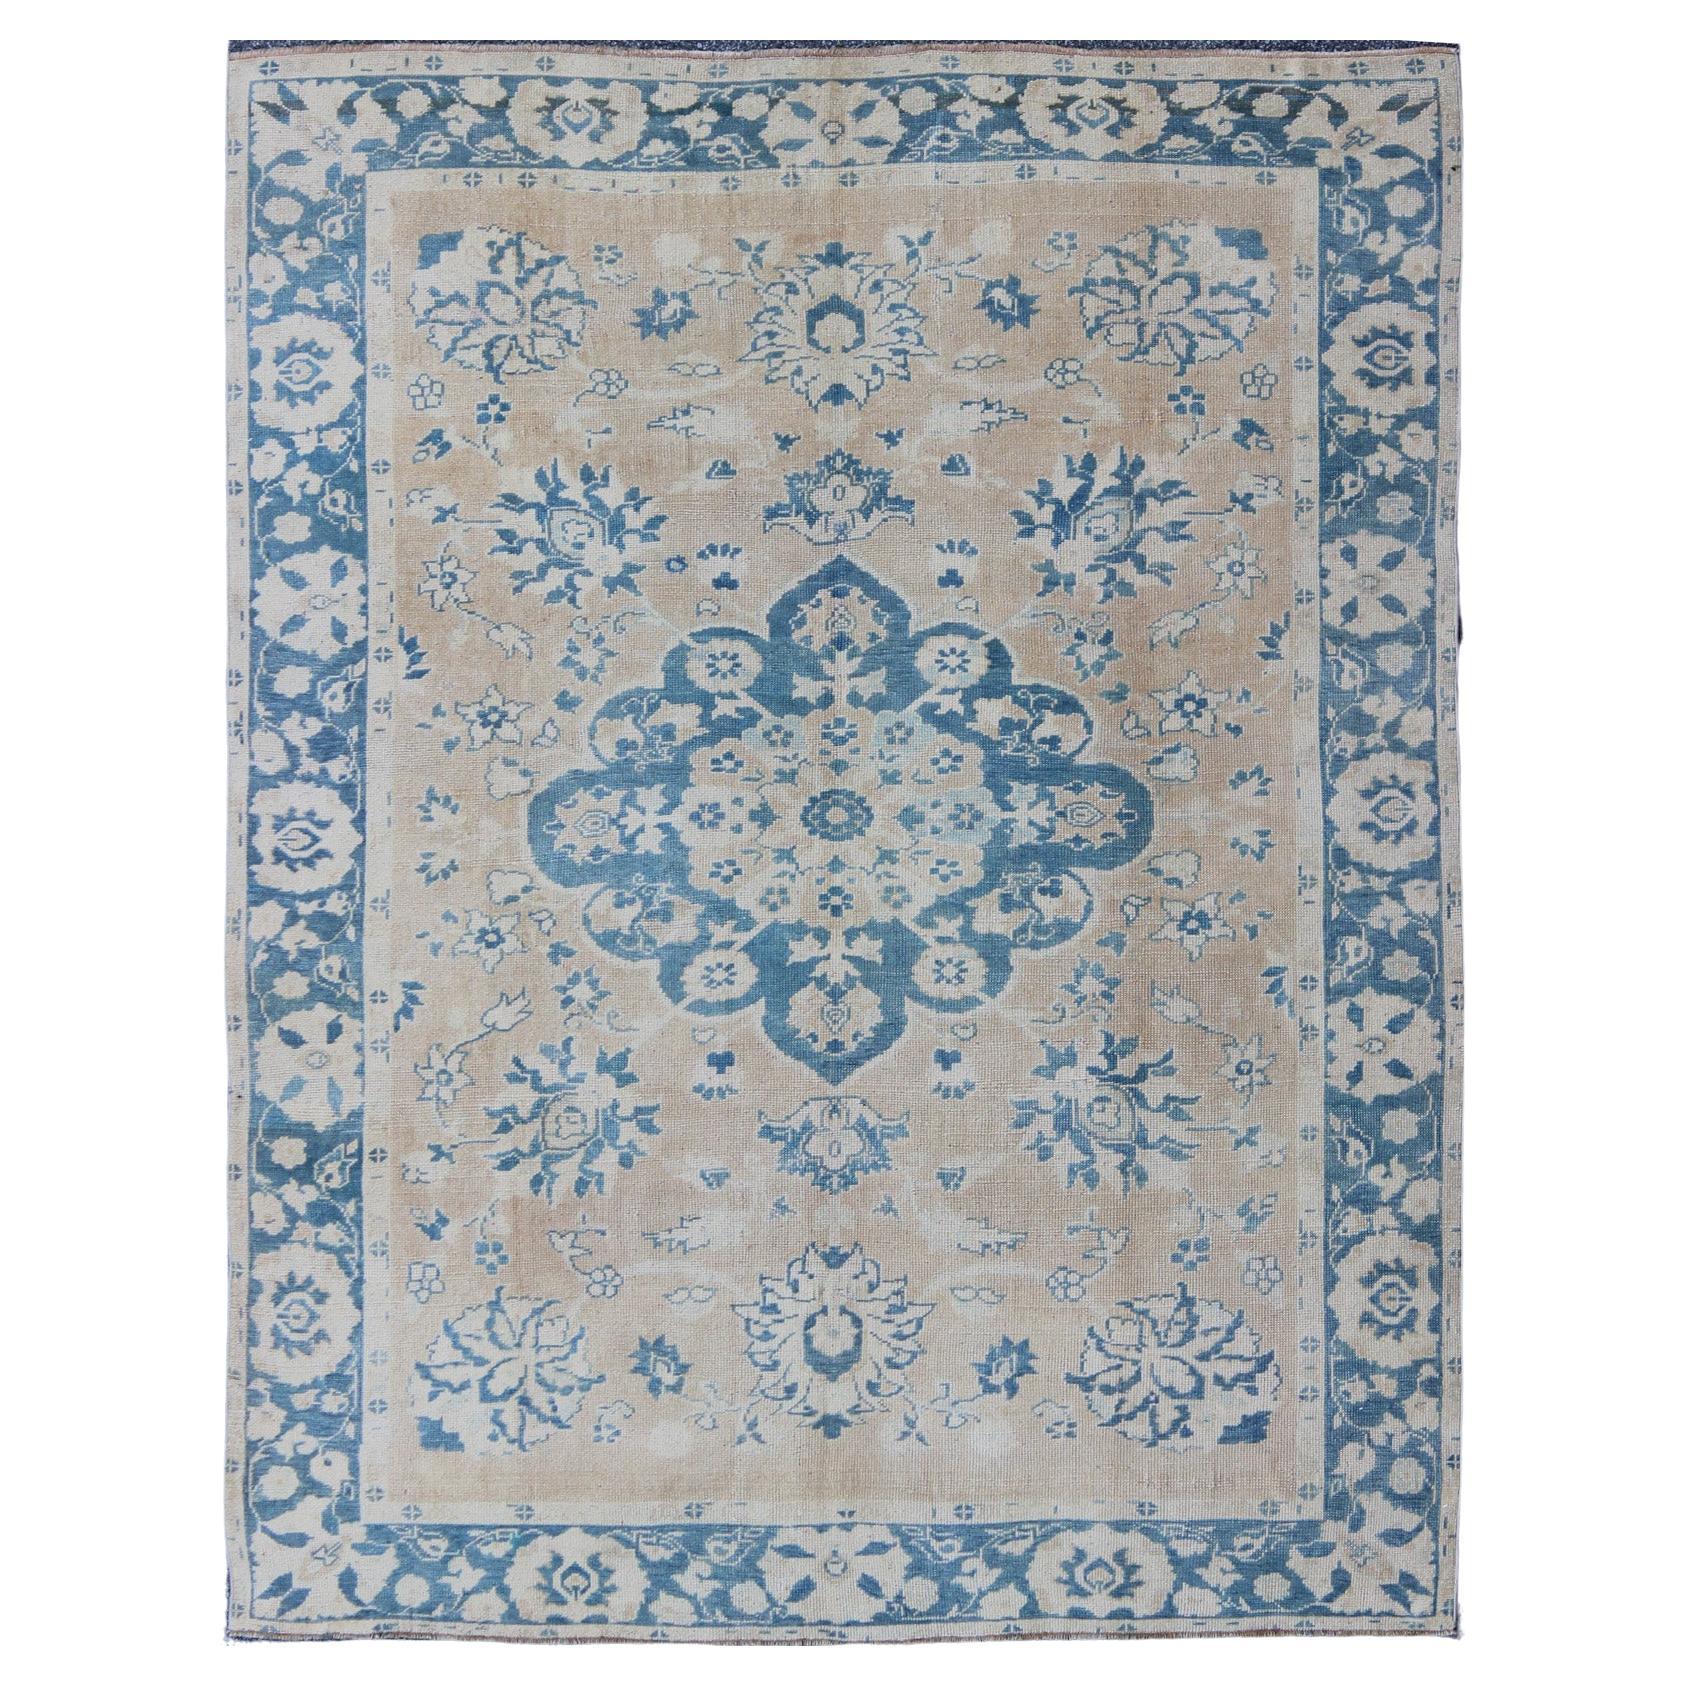 1930's Floral Medallion Turkish Oushak Rug in Butter Yellow and Blue